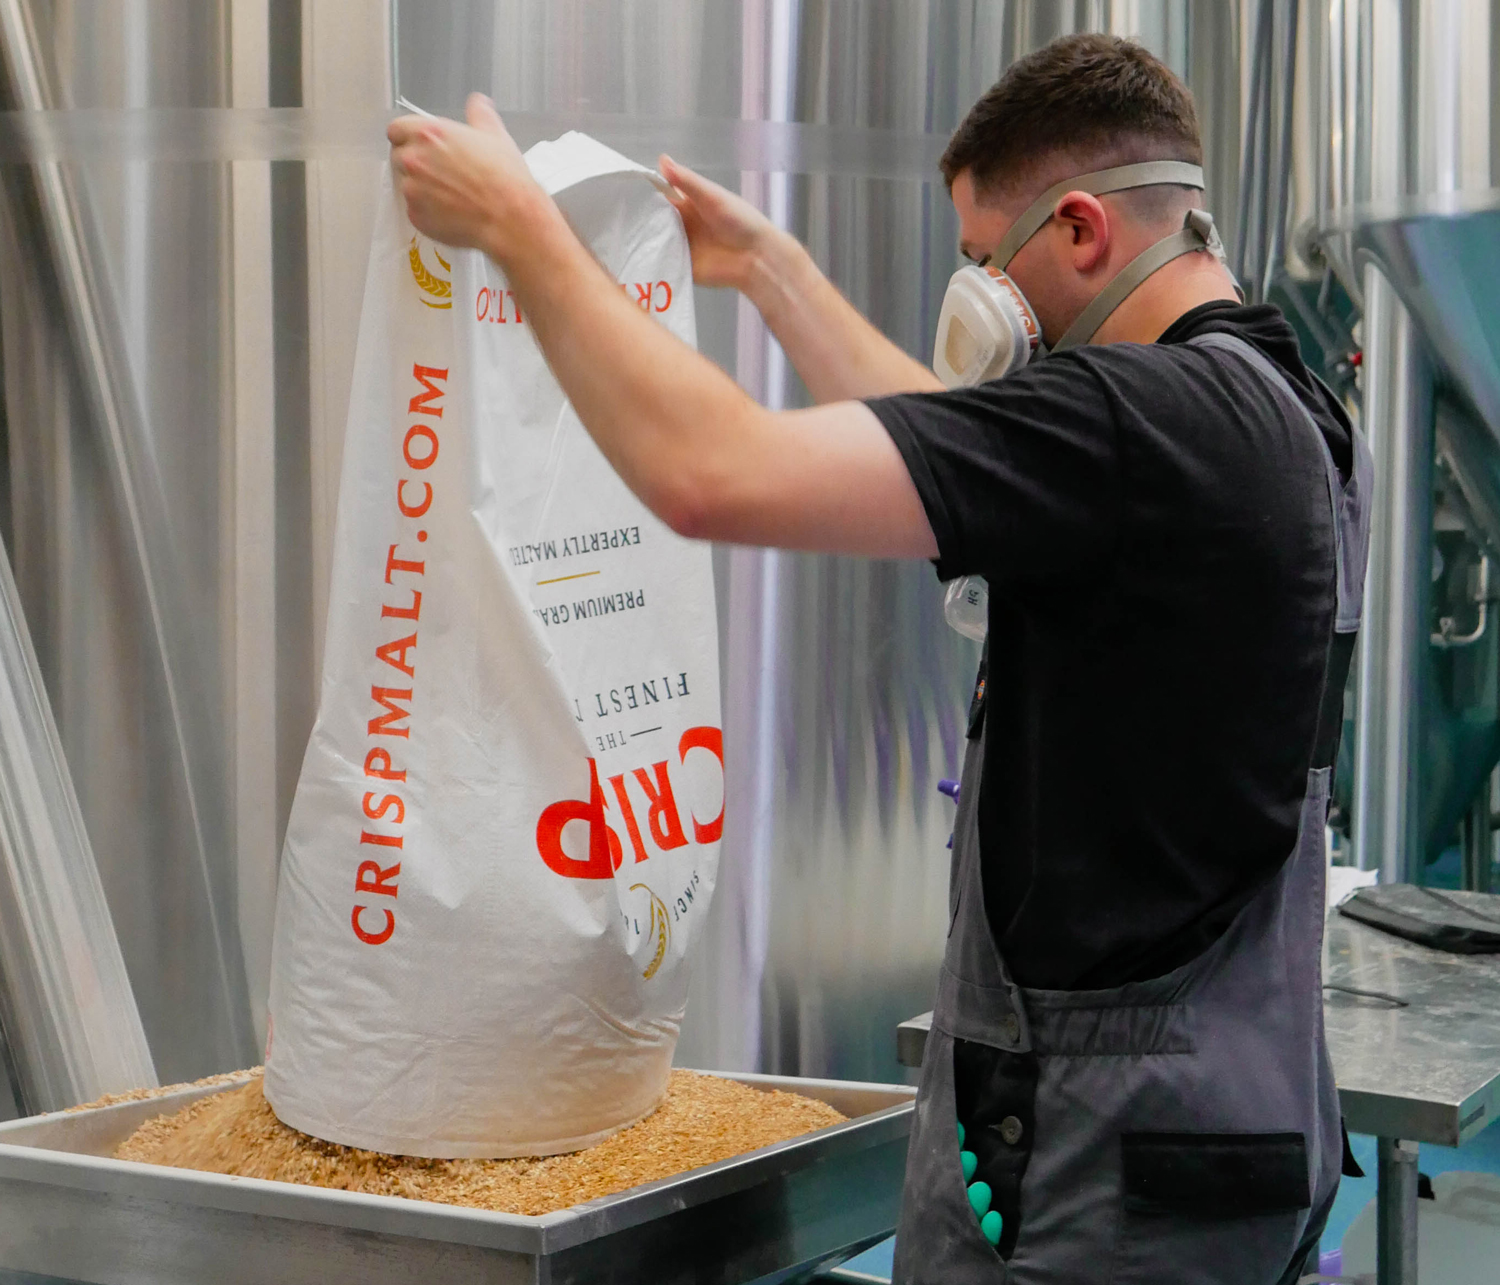 Sam Fraise from Attic Brewery tips out malt from a Crisp branded bag